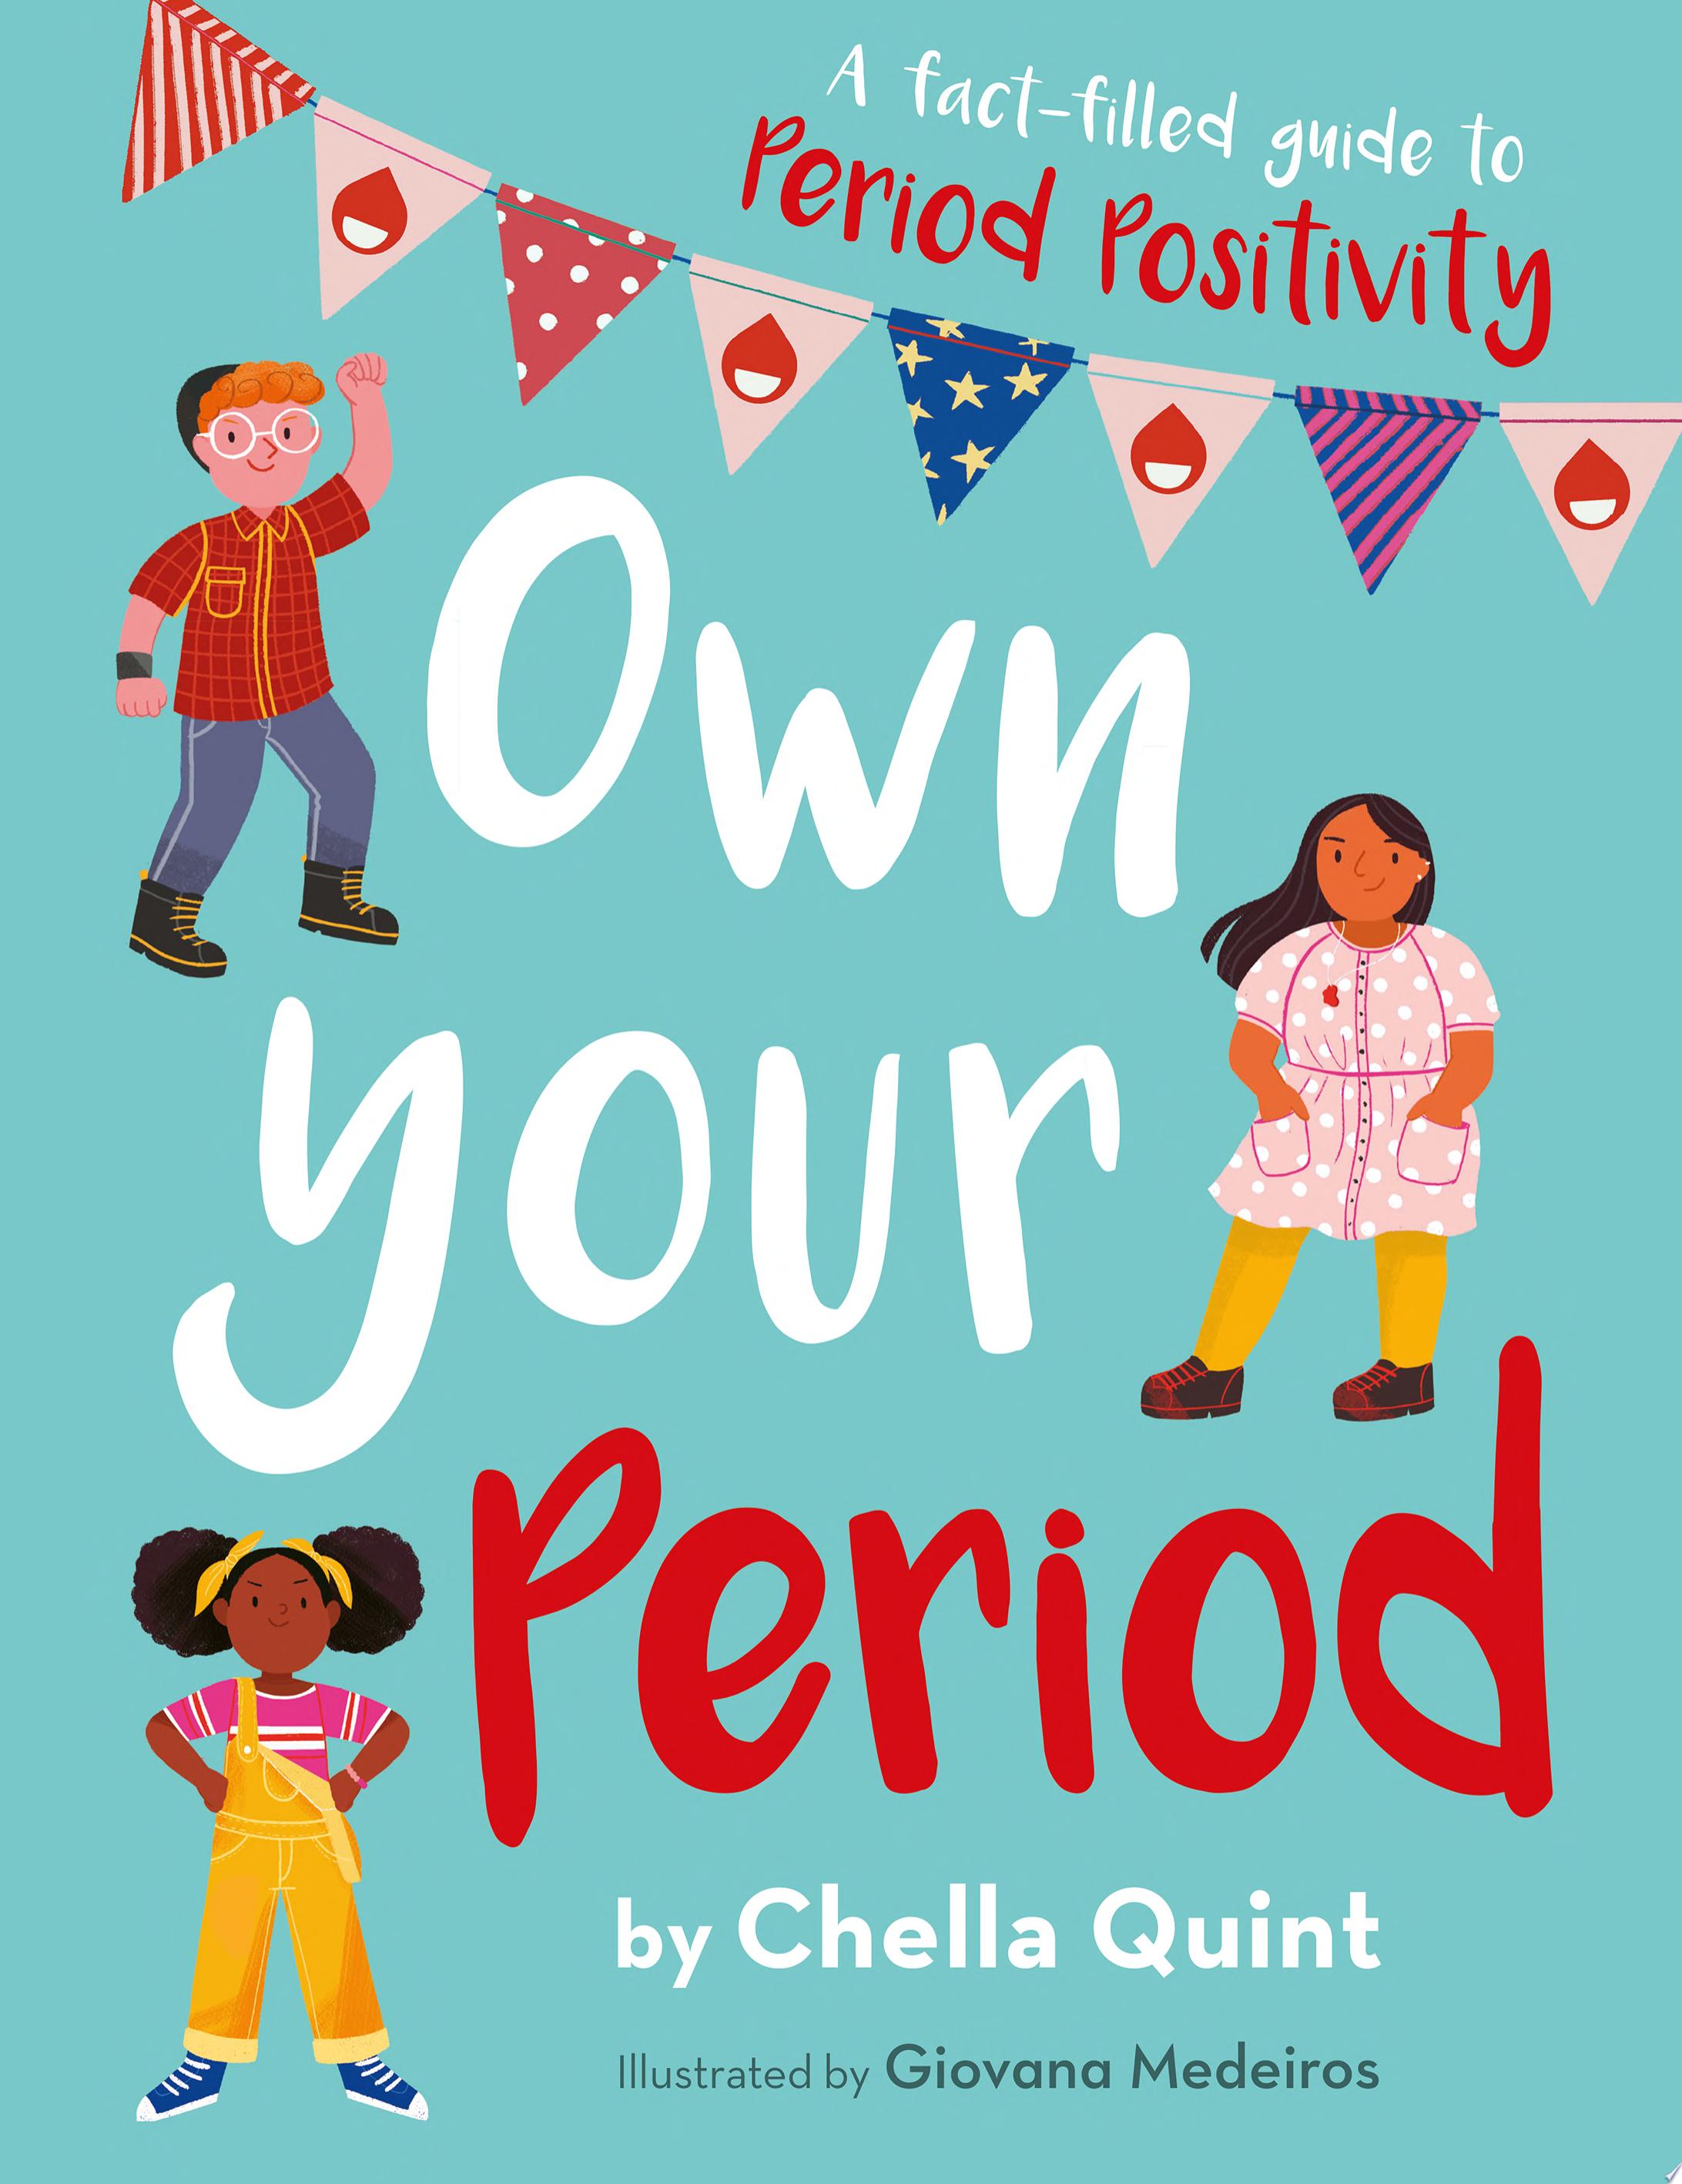 Image for "Own Your Period"